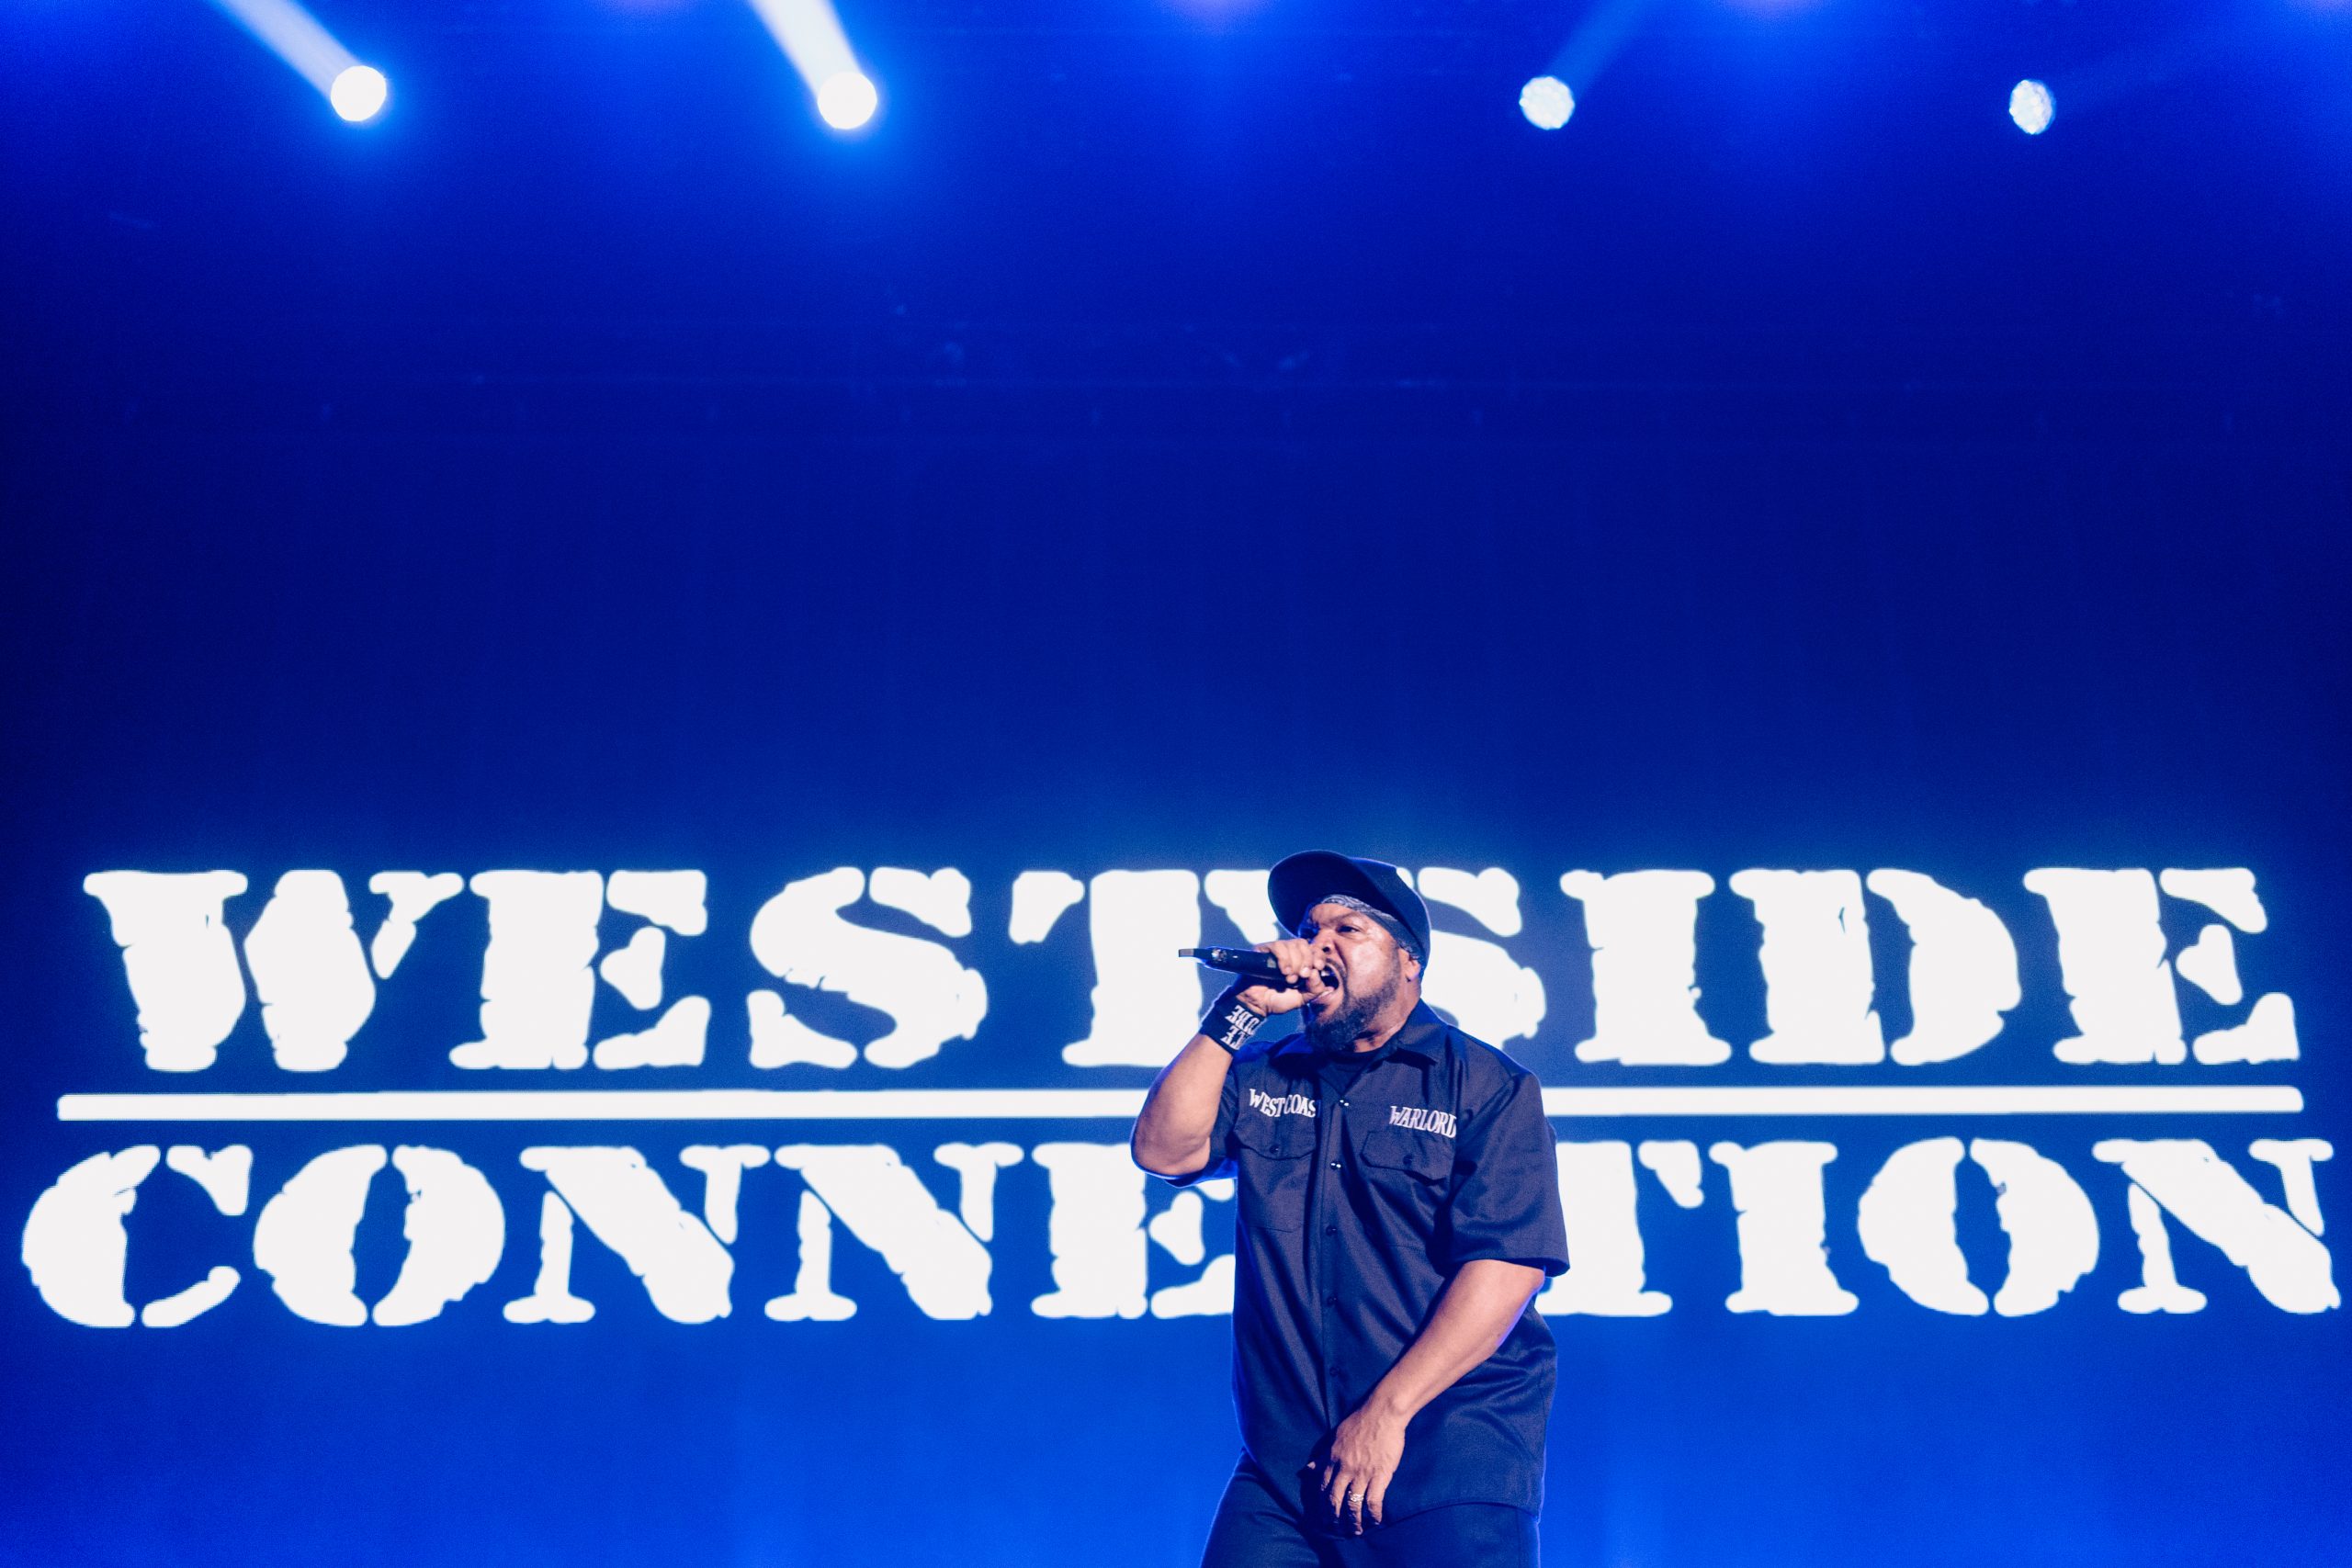 What Went Down at Ice Cube’s ‘High Rollers’ Tour